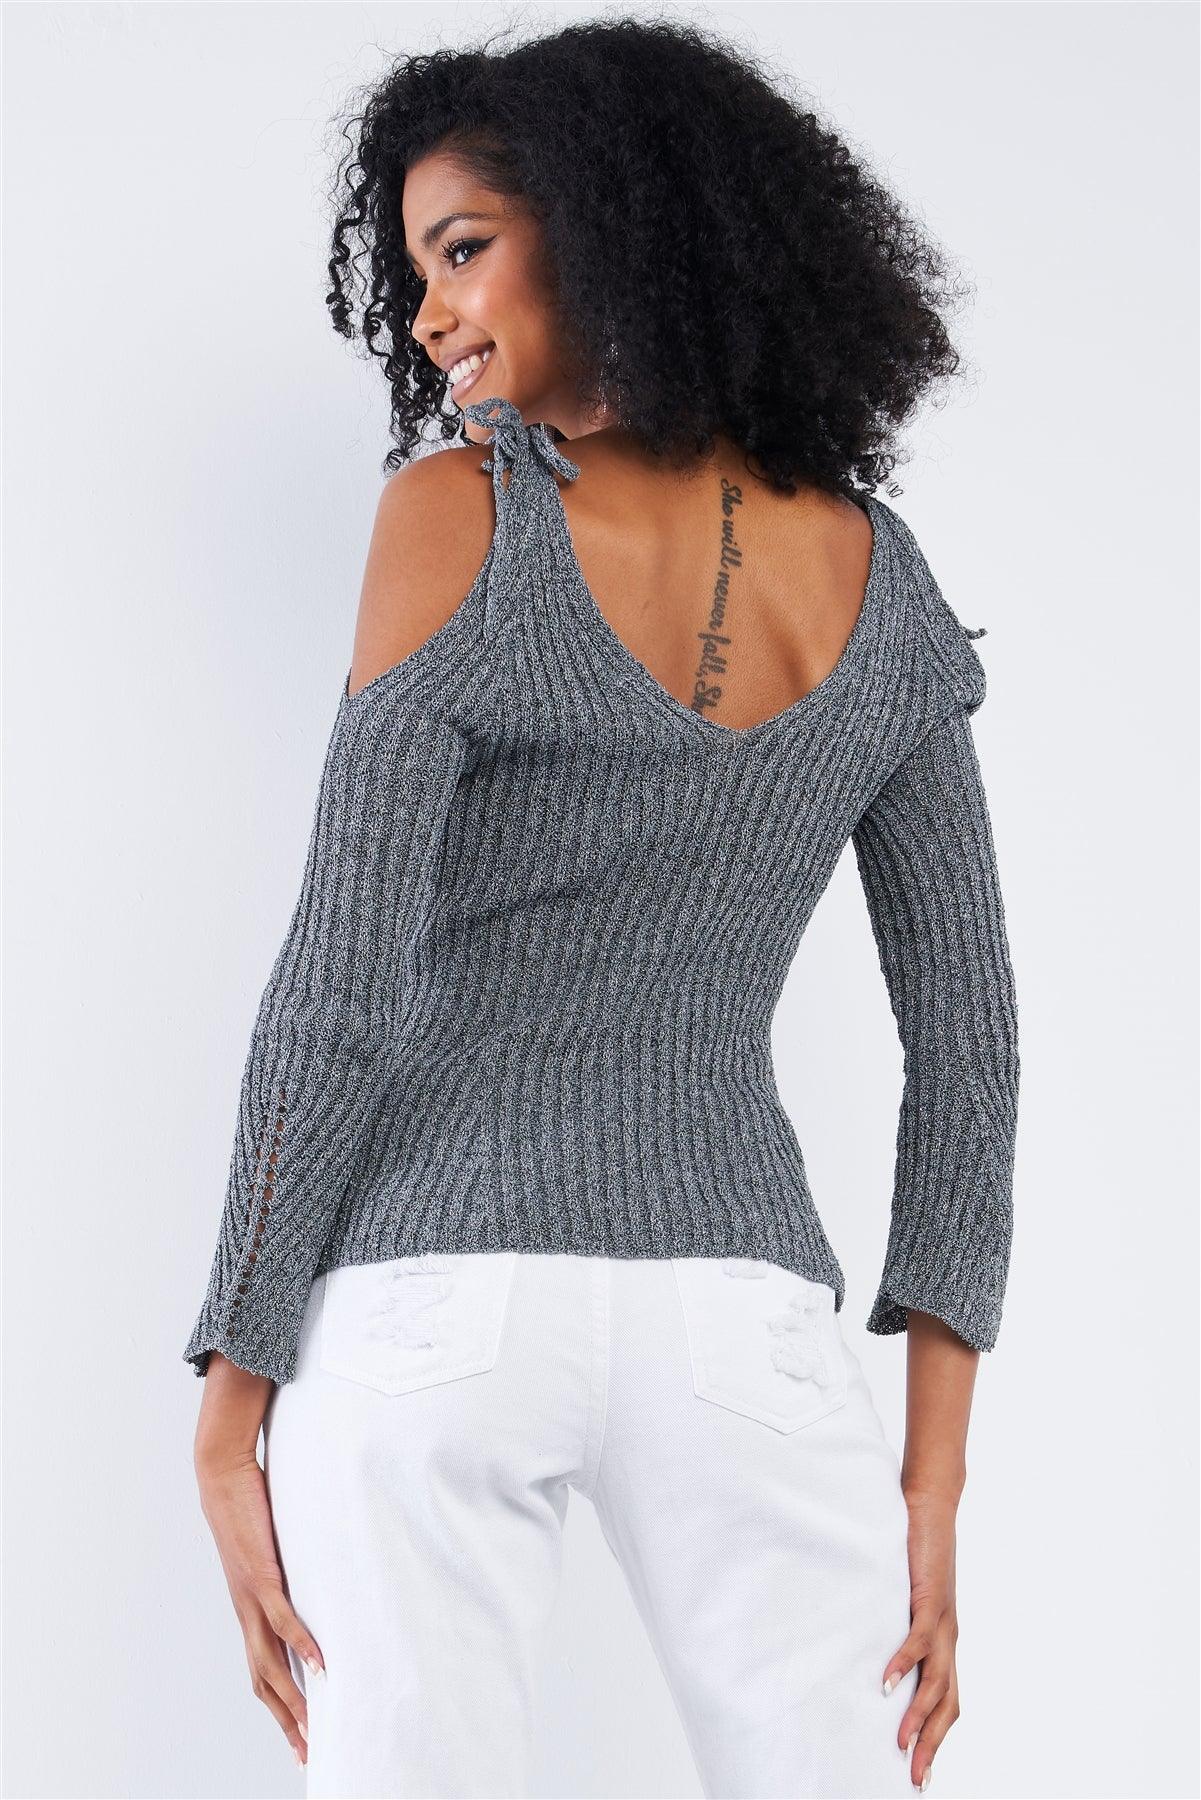 Concrete Grey Silver Tinsel Knitted Peek-A-Boo Self Tie Shoulder Top /2-2-2